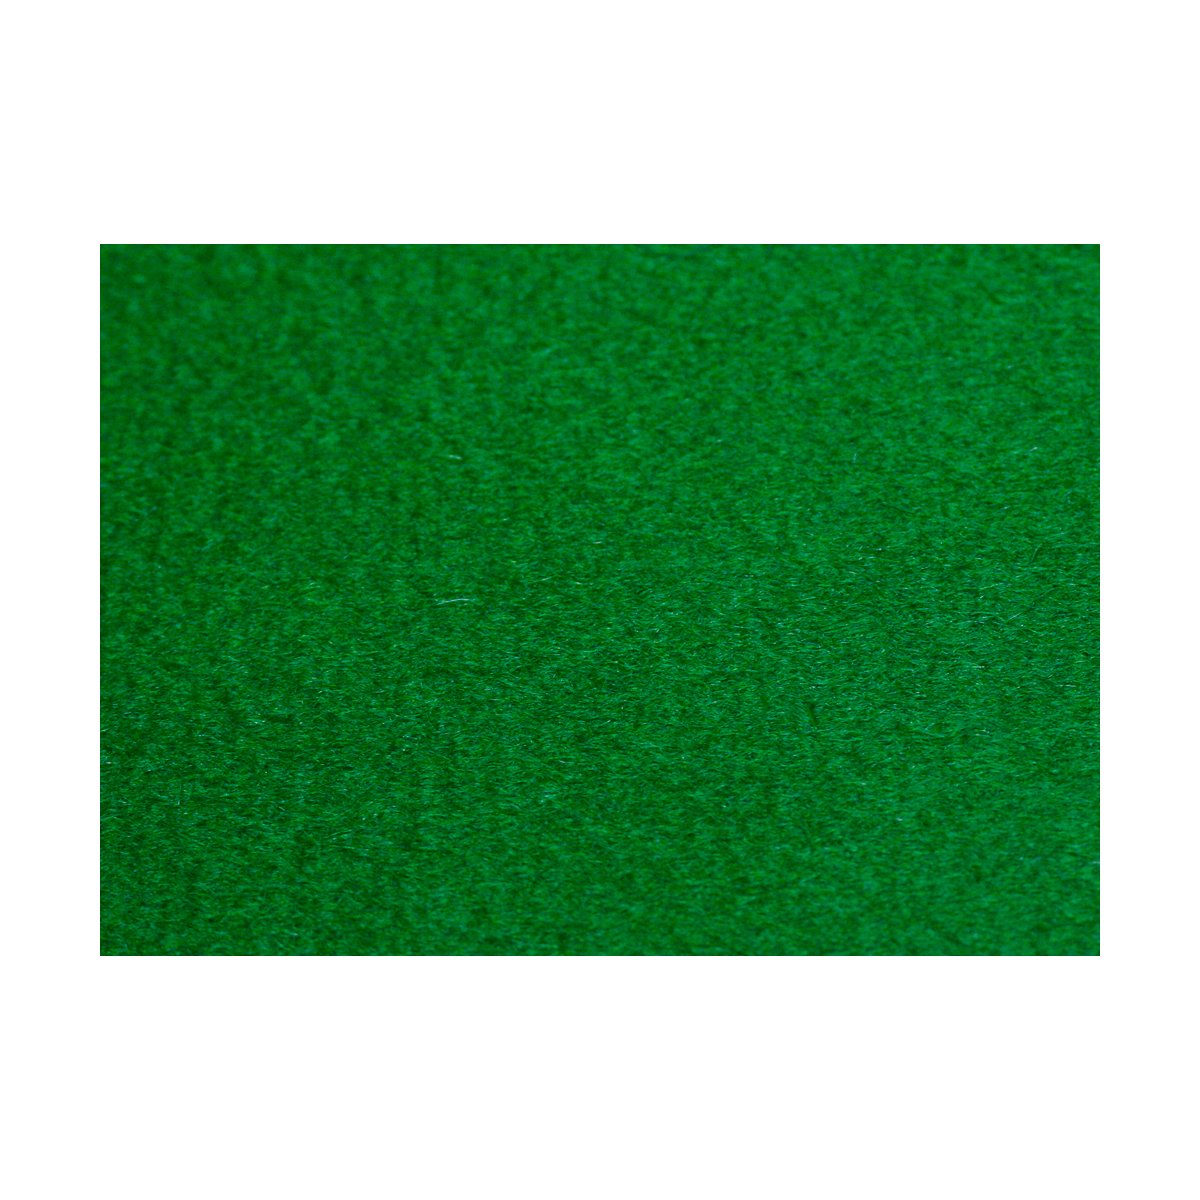 Displaying Image For Green Table Felt